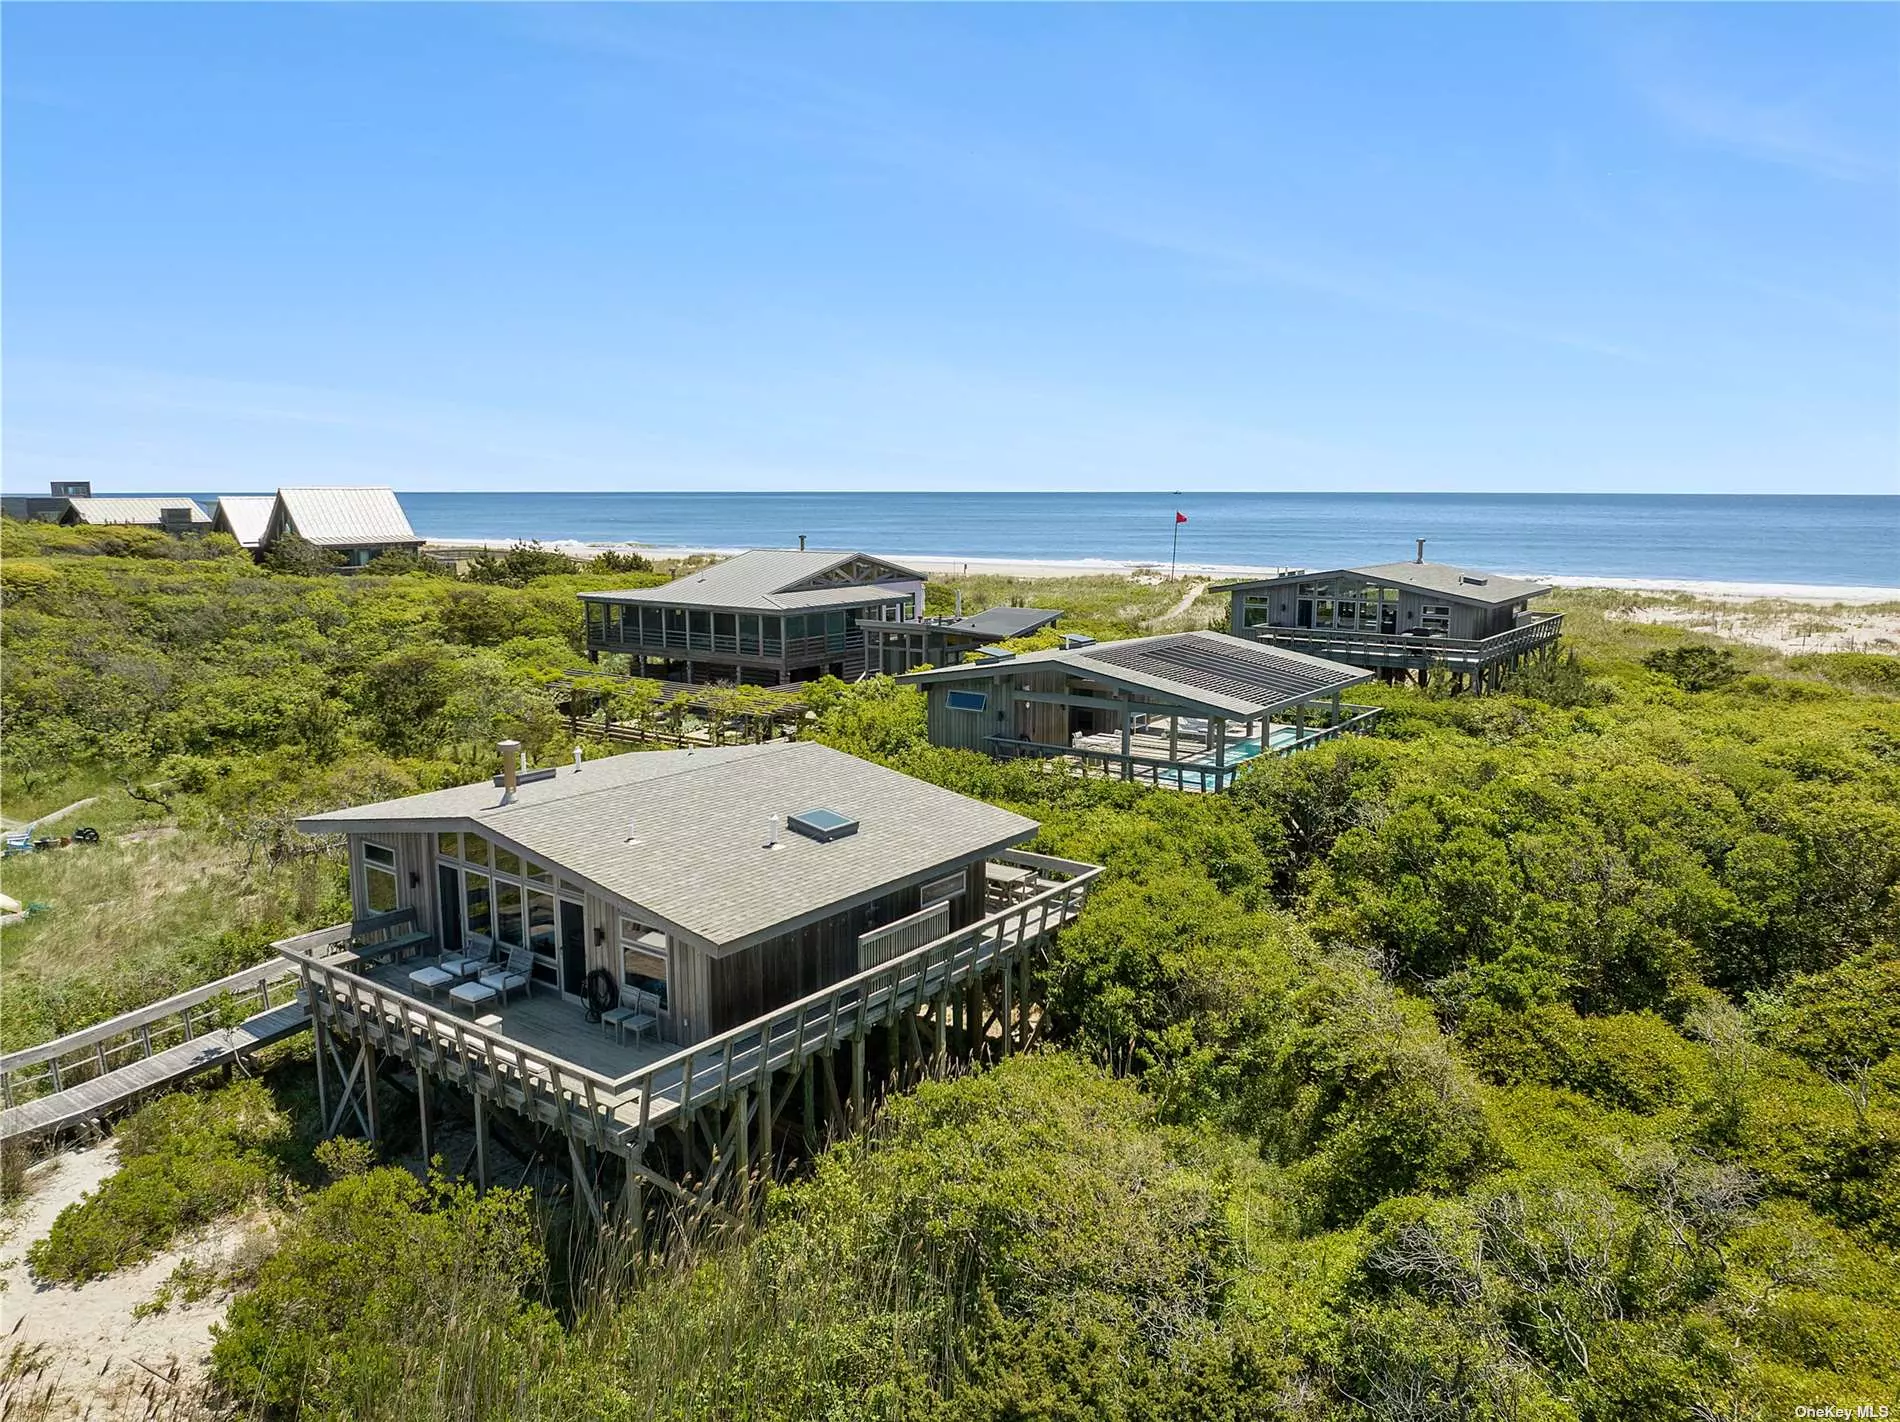 Welcome to One Atlantic Walk. This exceptional waterfront estate is located in the secluded Water Island community on Fire Island. The property transverses across a continuous .97-acre from the Great South Bay to the Atlantic Ocean and comprises 3 separate structures including The Ocean House, The Pool House, and The Bay House. From the moment you arrive at your private 250&rsquo; long dock in your 25&rsquo; Steiger Craft boat , which is included with the sale you are in true tranquil paradise. Your own private boardwalk leads you from the bay straight to the ocean. Totalling 4 Bdrms, 5 Full Bathrooms, Fitness Room and a Lap Pool, Atlantic Walk is the definition of a Secluded Beach Estate.